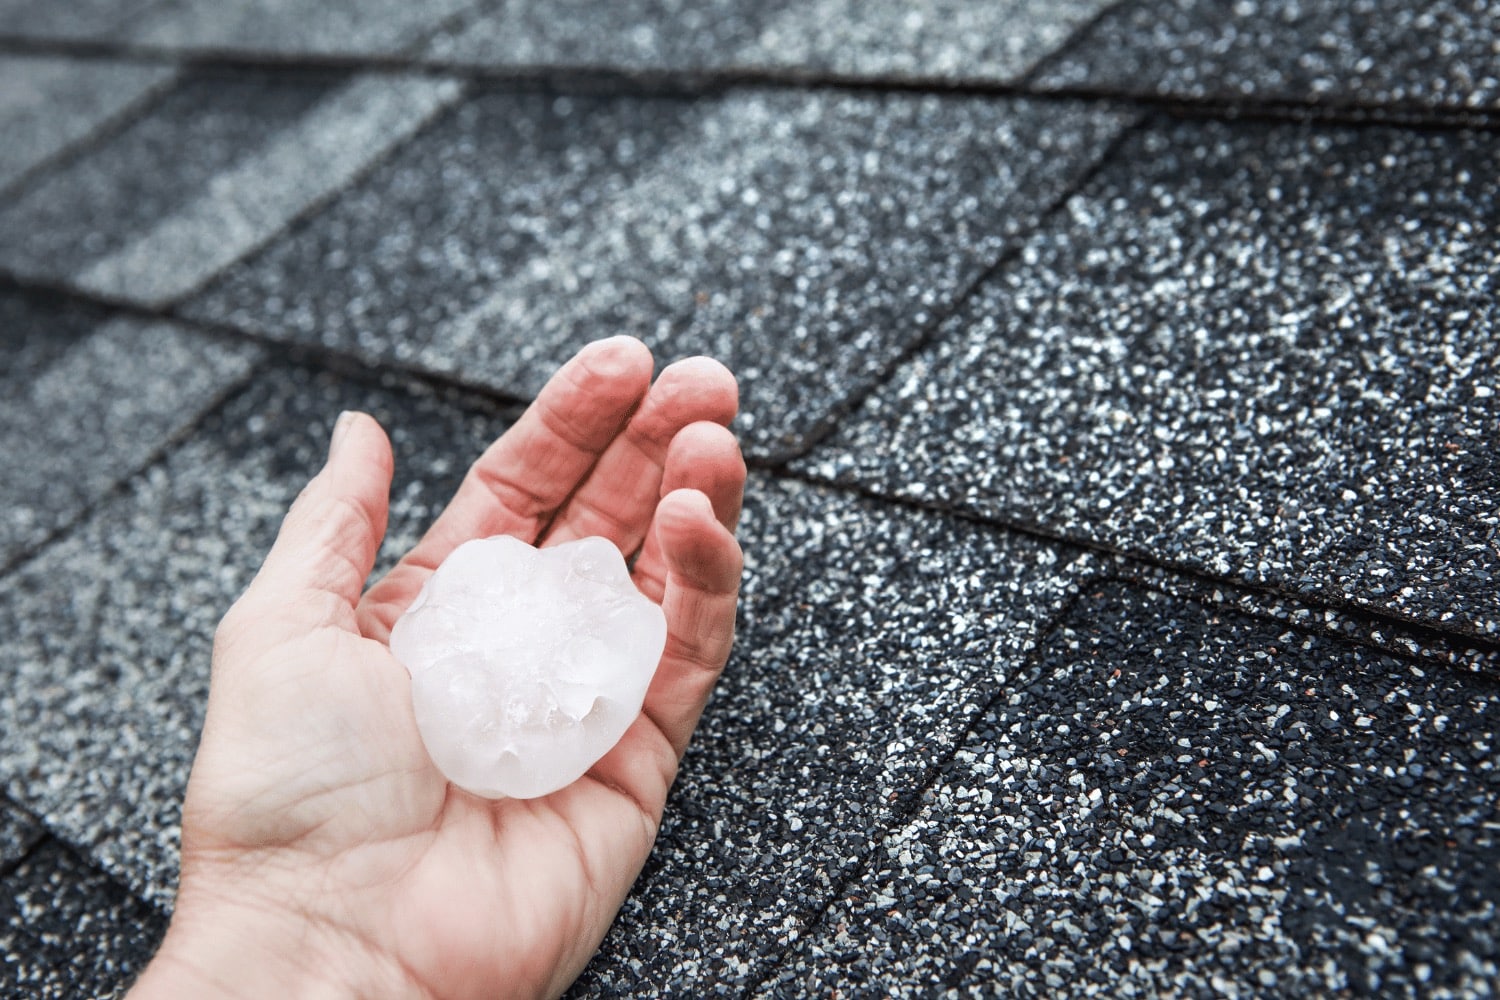 Illustration of roofing professionals conducting hail damage repairs